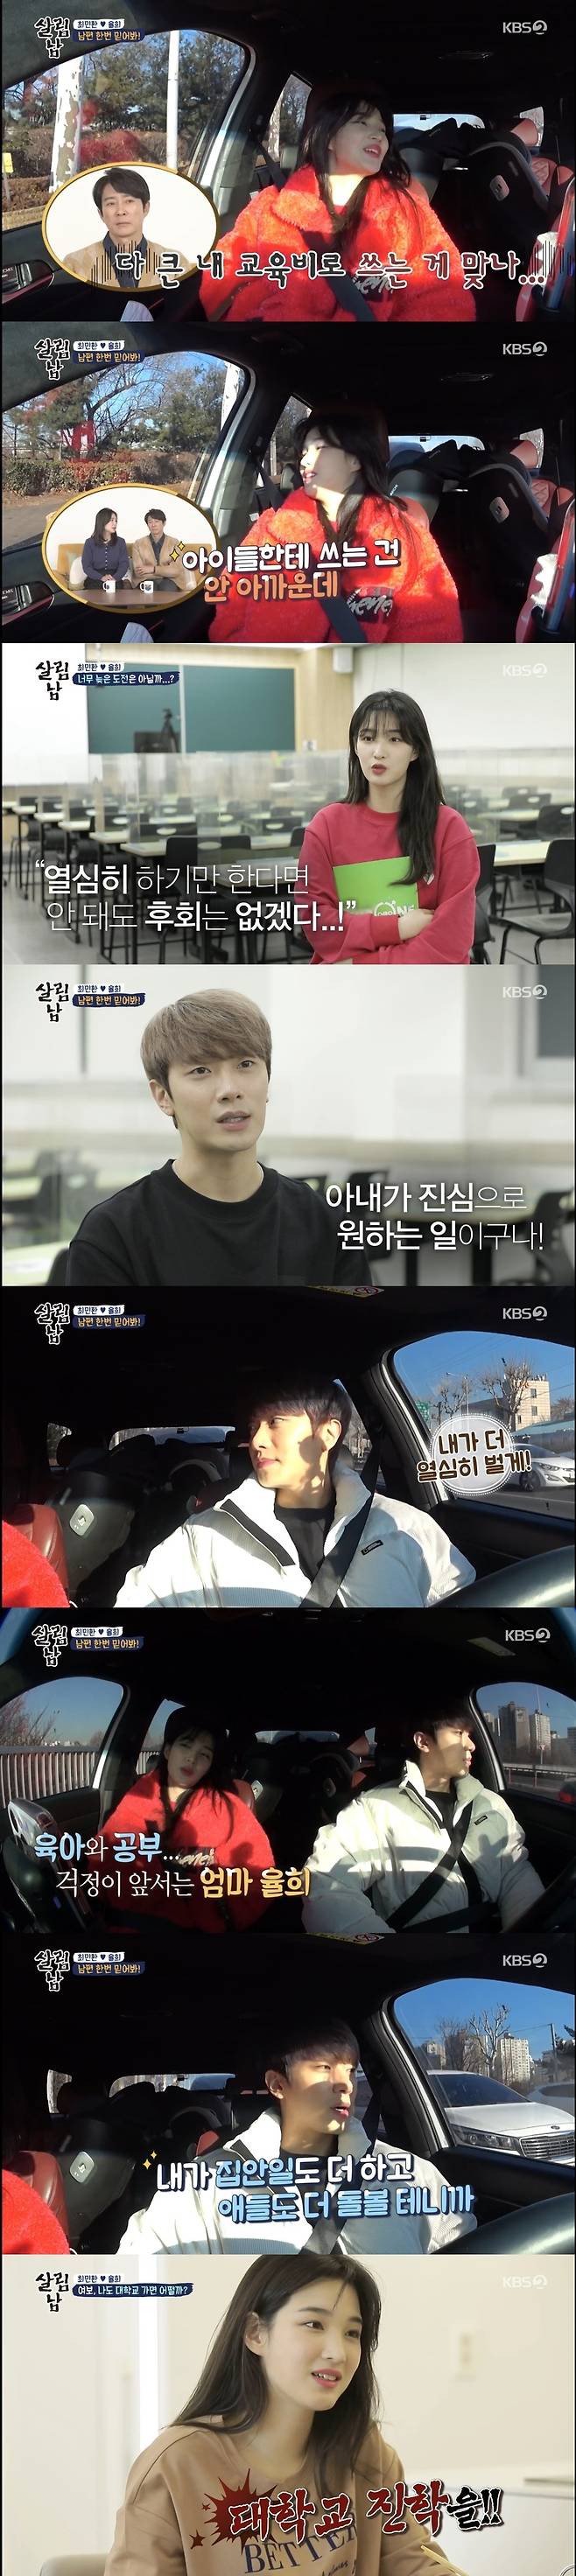 Kim Yul-hee, who hopes to go to college, expressed his worries about the cost of the entrance examination, which is more expensive than he thought.In the KBS 2TV entertainment program Saving Men 2 broadcasted on February 12, Kim Yul-hee, who was consulted with her husband Choi Min-hwan, was shown to visit the entrance examination school.Kim Yul-hee, who saw the GED after dropping out of high school in the first grade, told Choi Min-hwan, I have been studying hard while I have never been in school.I have never studied hard in my life. I think I should study for my child, so I think I should do it together. Kim Yul-hee said, Its not like that, you know.When I go to college and go to school and meet my peers, I say, Where did you come from? What did you do?I can not help but explain that I had done my job on stage. In the seriousness of Kim Yul-hee, Choi Min-hwan said, I think it would be better to get counseling than to think about it.In the meantime, I tended to shed my words of communication casually.Kim Yul-hees study is supported by the childrens education, and if the mother and the father study, will not it be done accordingly? Kim Yul-hee said, I want to learn a big dream toward pharmacy, I am interested in the medical field. The instructor explained, If you think about this, it is usually about 3 grade.Kim Yul-hee told the instructor, I have an question, is there anyone who actually came to raise?The lecturer said, I was very old, but I went to the bank and went to the bank to boldly leave and come to the bank. I went to the shift to study for two years and aim.A male student went to a good university even if he studied for a year and heard his name. Kim Yul-hee asked, Are you the ones who originally studied? and the instructor said, Not at all; they were people who had no information at all.Is it possible for a person like me to go to a university I want? The instructor advised, It is better to change that idea. If you really try, there is no regret about it.Kim Yul-hee said, I thought I was late, but I was relieved that I would not regret it if I worked hard.Choi Min-hwan said, I did not know it at first, but Kim Yul-hees story is serious and I really want to support you a lot.On his way home after school counseling: Choi Min-hwan worried about Kim Yul-hee, who had a poor expression, and Kim Yul-hee confided in, Ill listen to the tuition and think about it.Choi Min-hwan said, You do not have to worry about the cost of the school.My brother can work hard, he showed a strong husband.Kim Yul-hee said, It is not a waste to spend on the education of the babies, but I do not know if I can do it while taking care of the children (I am sorry) by using it as my big education expenses.Choi Min-hwan then comforted Kim Yul-hee, saying, Dont worry too much because Ill do housework and baby things.Kim Yul-hee added, It would be better to study gradually while watching the Internet lecture than going to the institute from the beginning. Choi Min-hwan made a study room for Kim Yul-hee.Kim Yul-hee said, I do not know if it will be a long-term or a short-term, thanks to my brothers support and love, but I promised to do it.